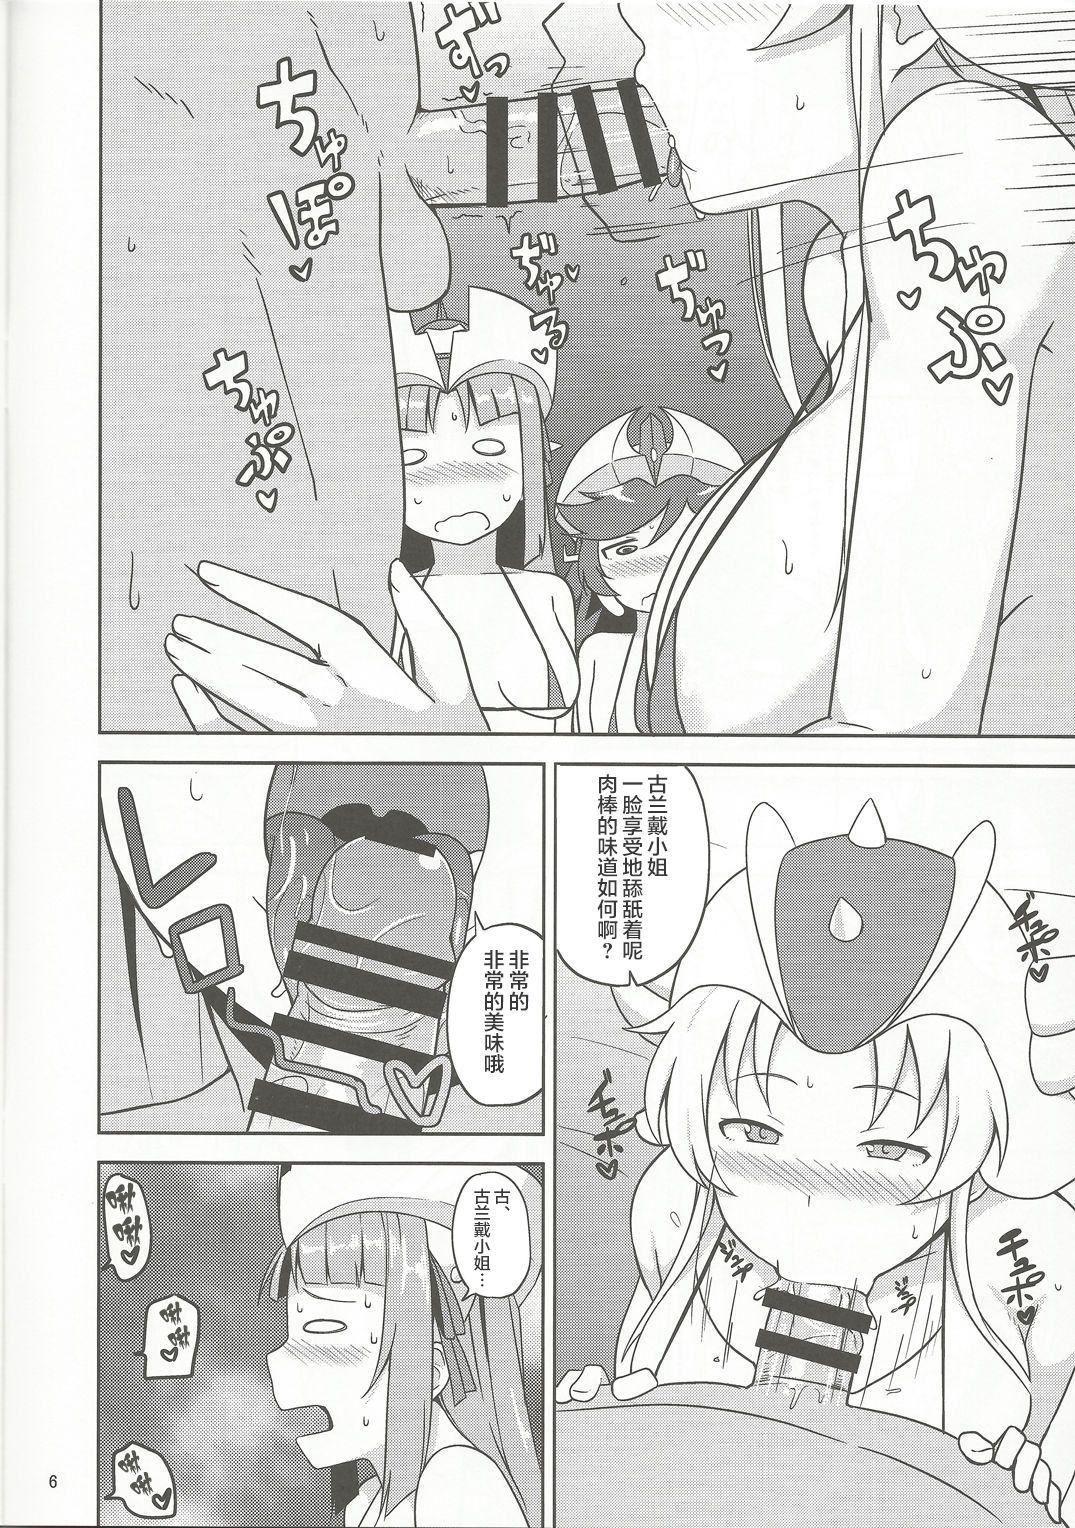 Leaked RGH - Robot girls z Scene - Page 5